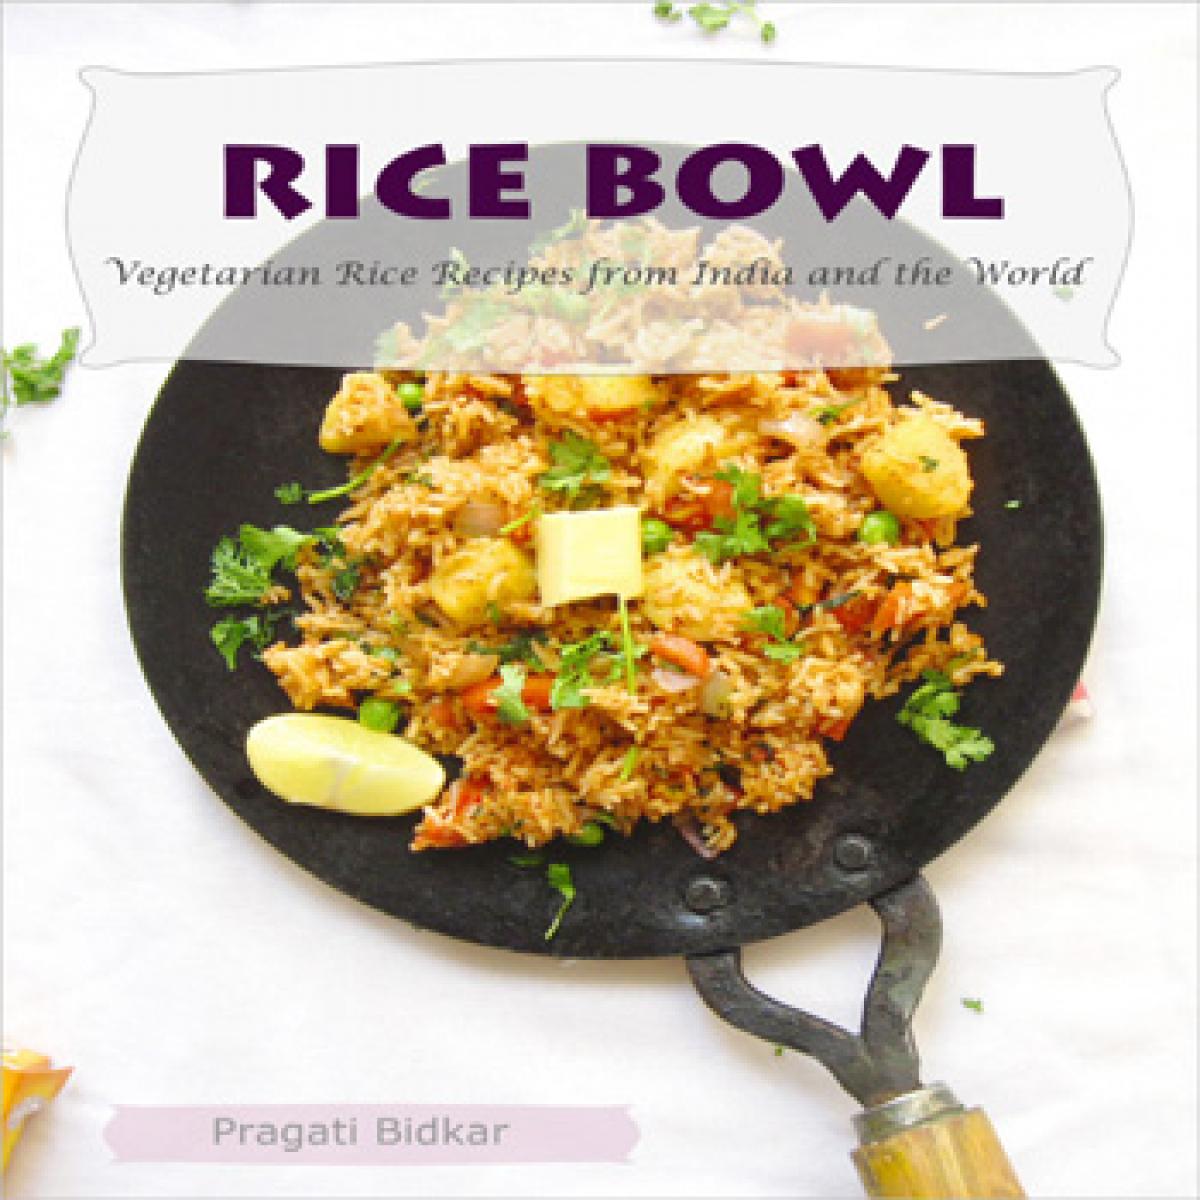 Asian rice recipes made simple